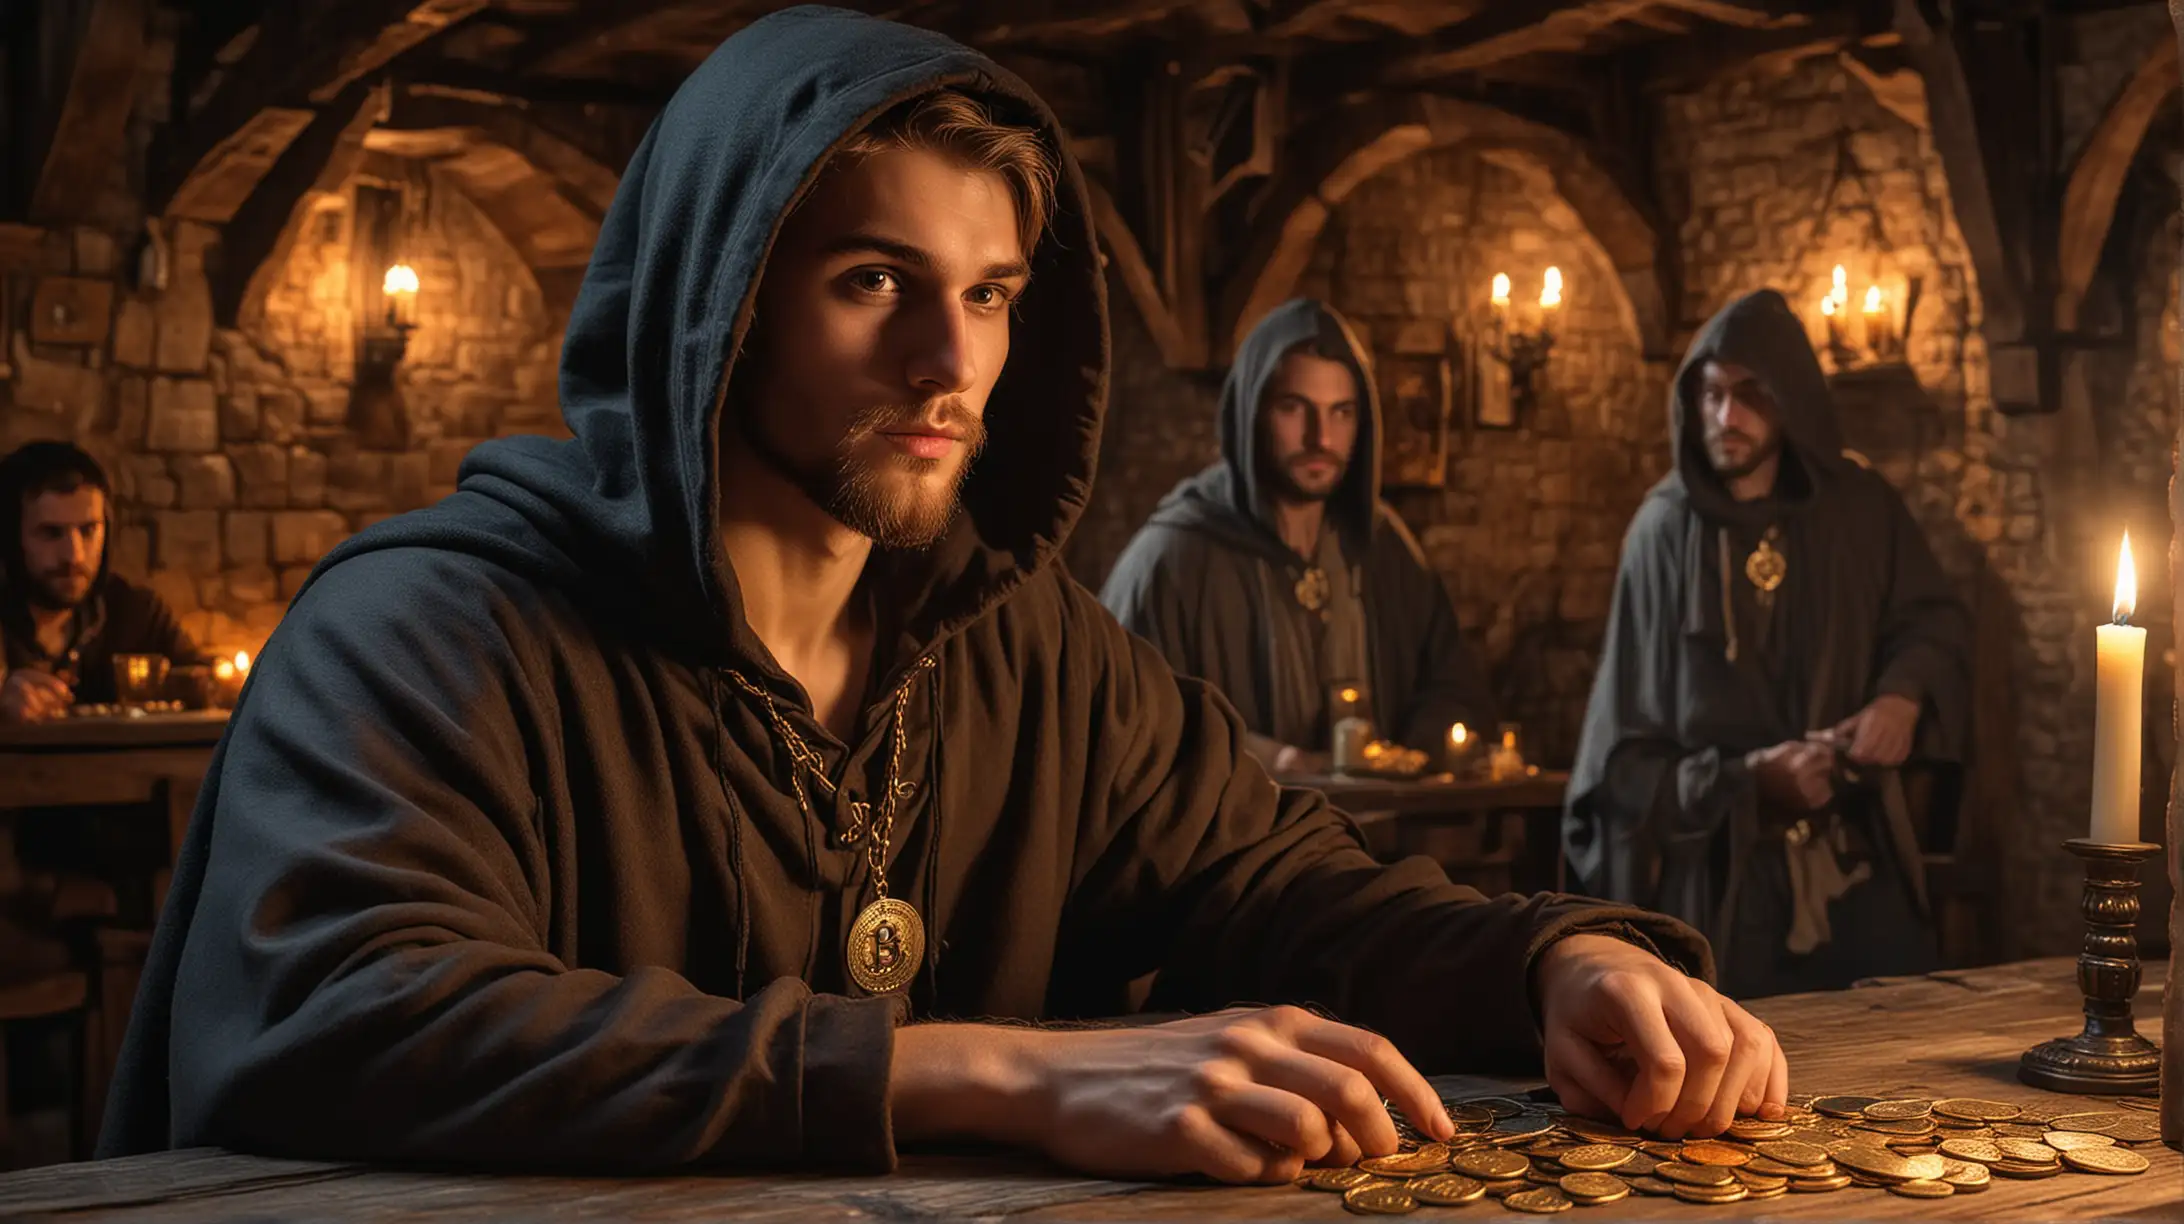 Handsome 22 year old males wearing a hooded cloak in a medieval tavern, bitcoin brothers, muscular chest visible under the open hoodie, betting gold Bitcoins in card games, short beard, mysterious in a detailed fantasy style with bitcoins guldens, golden medals on the open hairy chest visible in the candle light